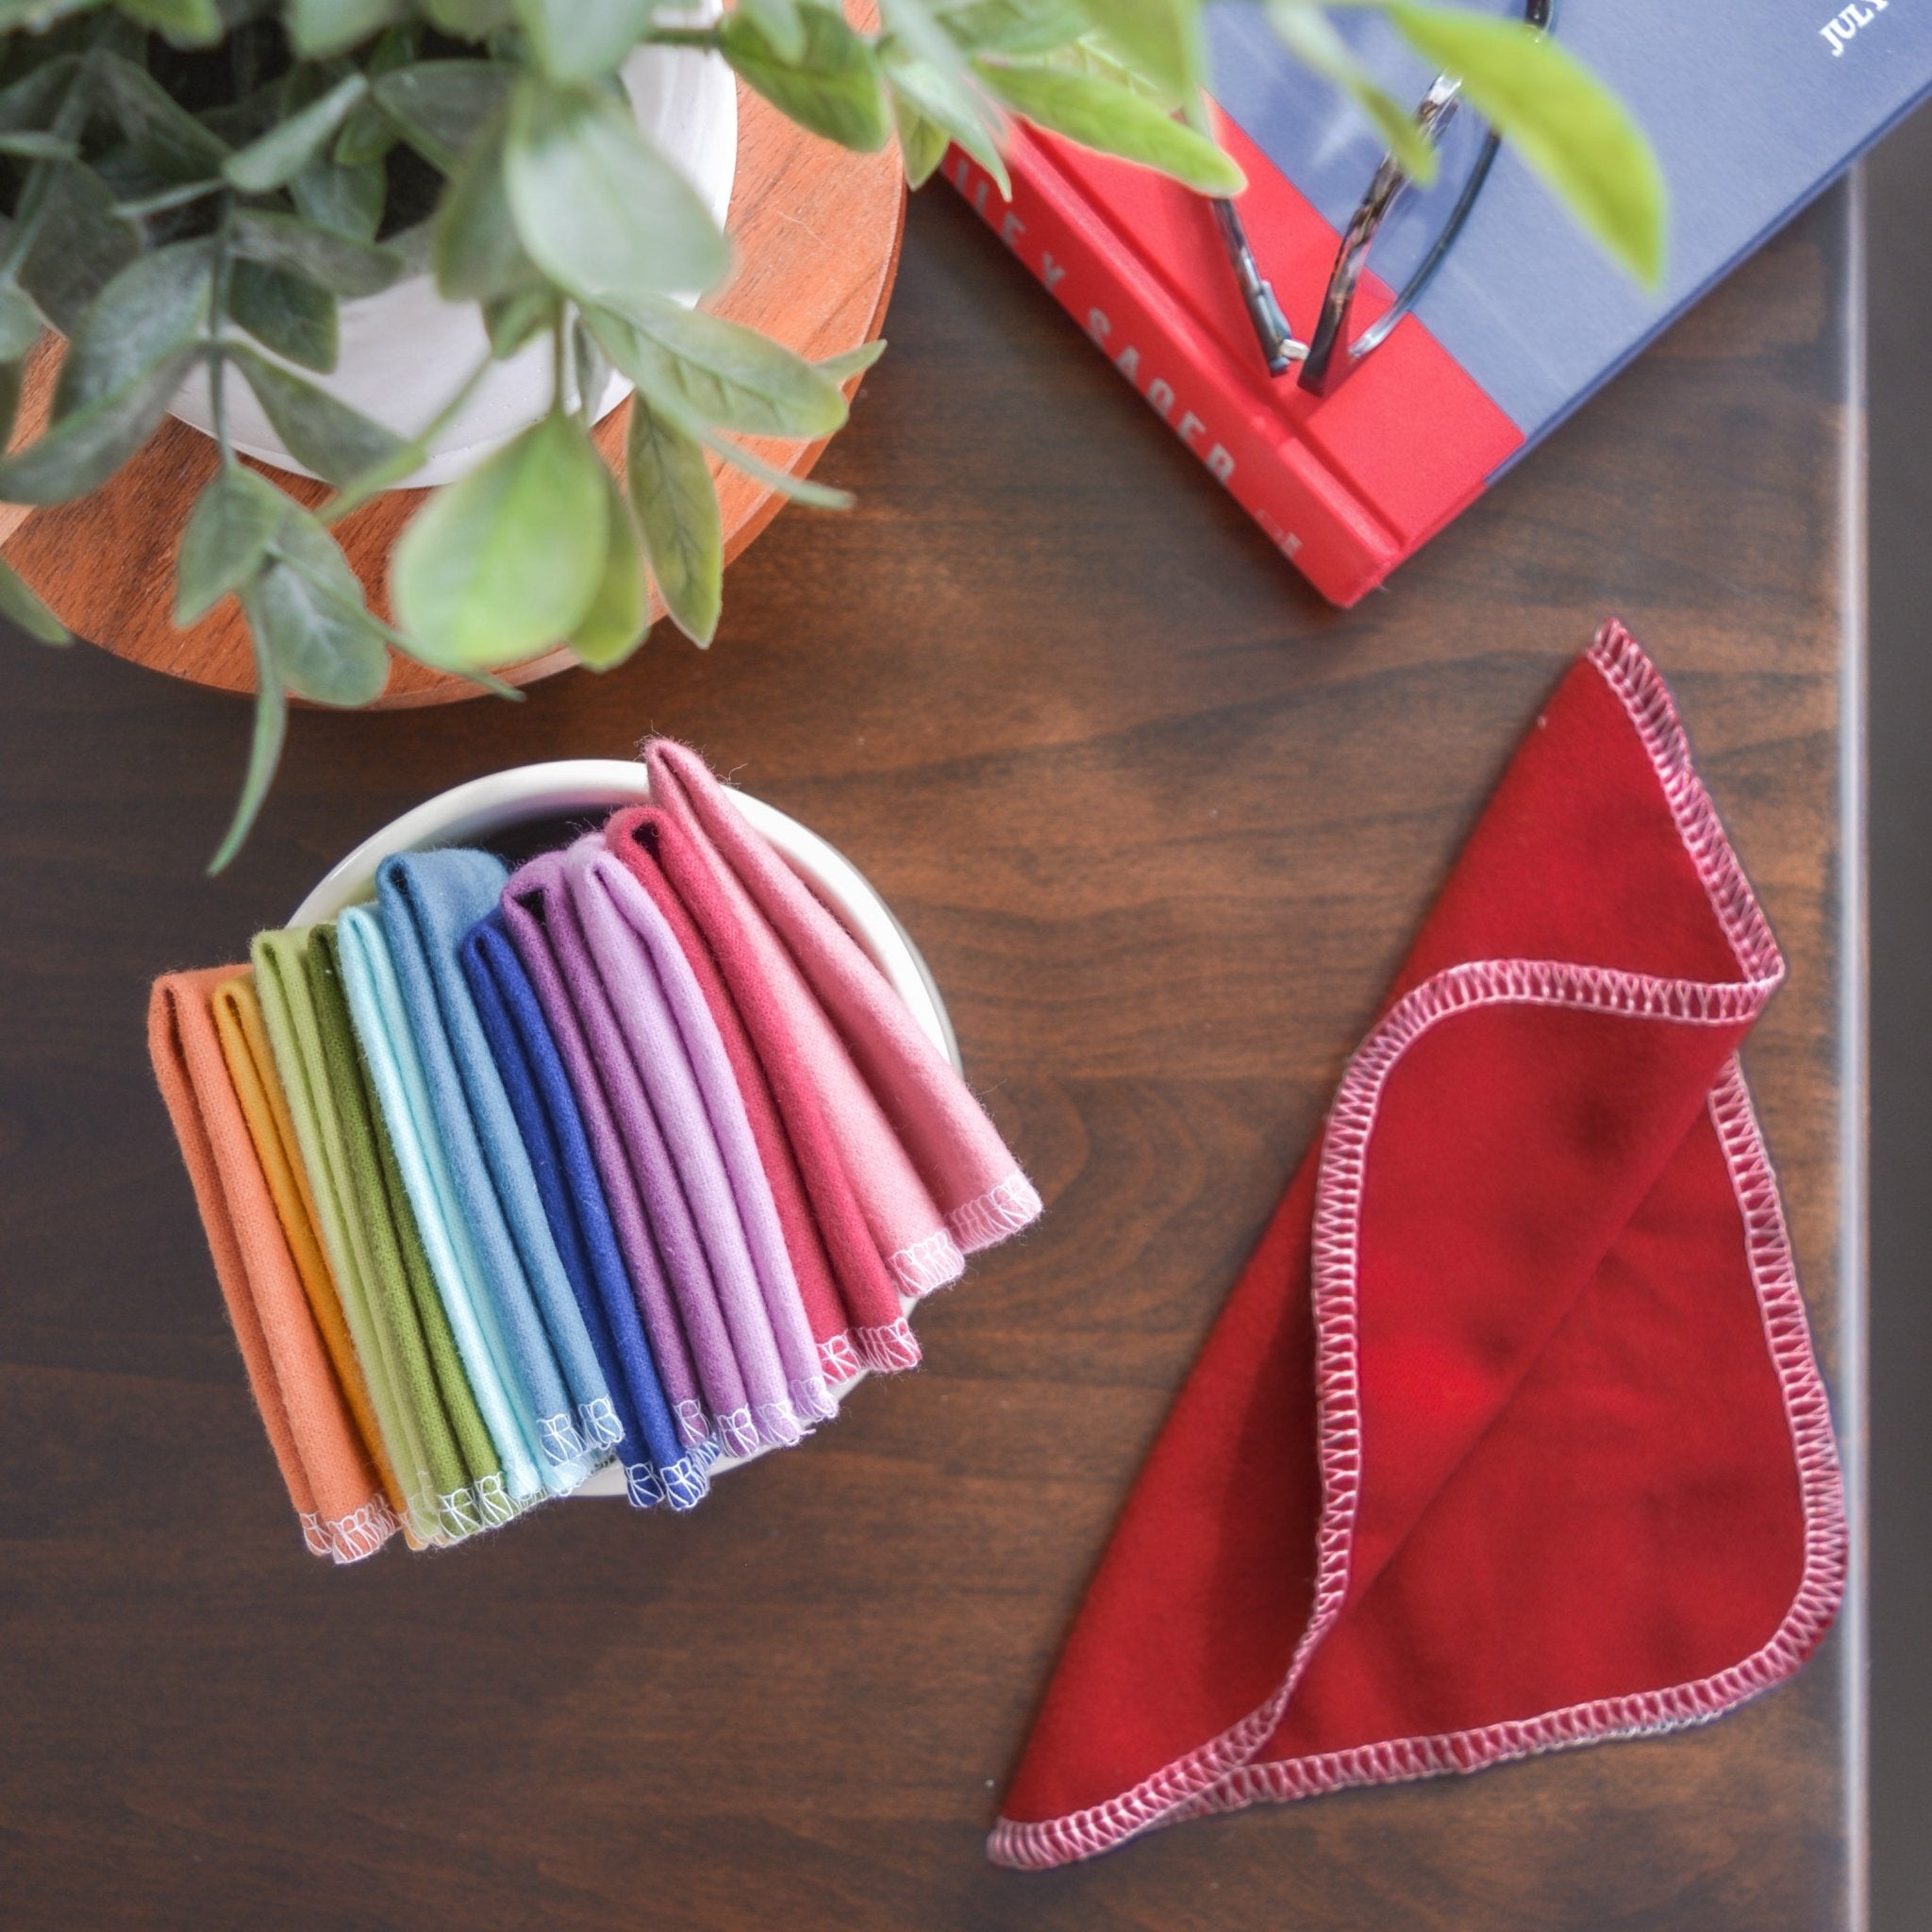 Cloth Wipes: Earthy Rainbow - Marley&#39;s Monsters